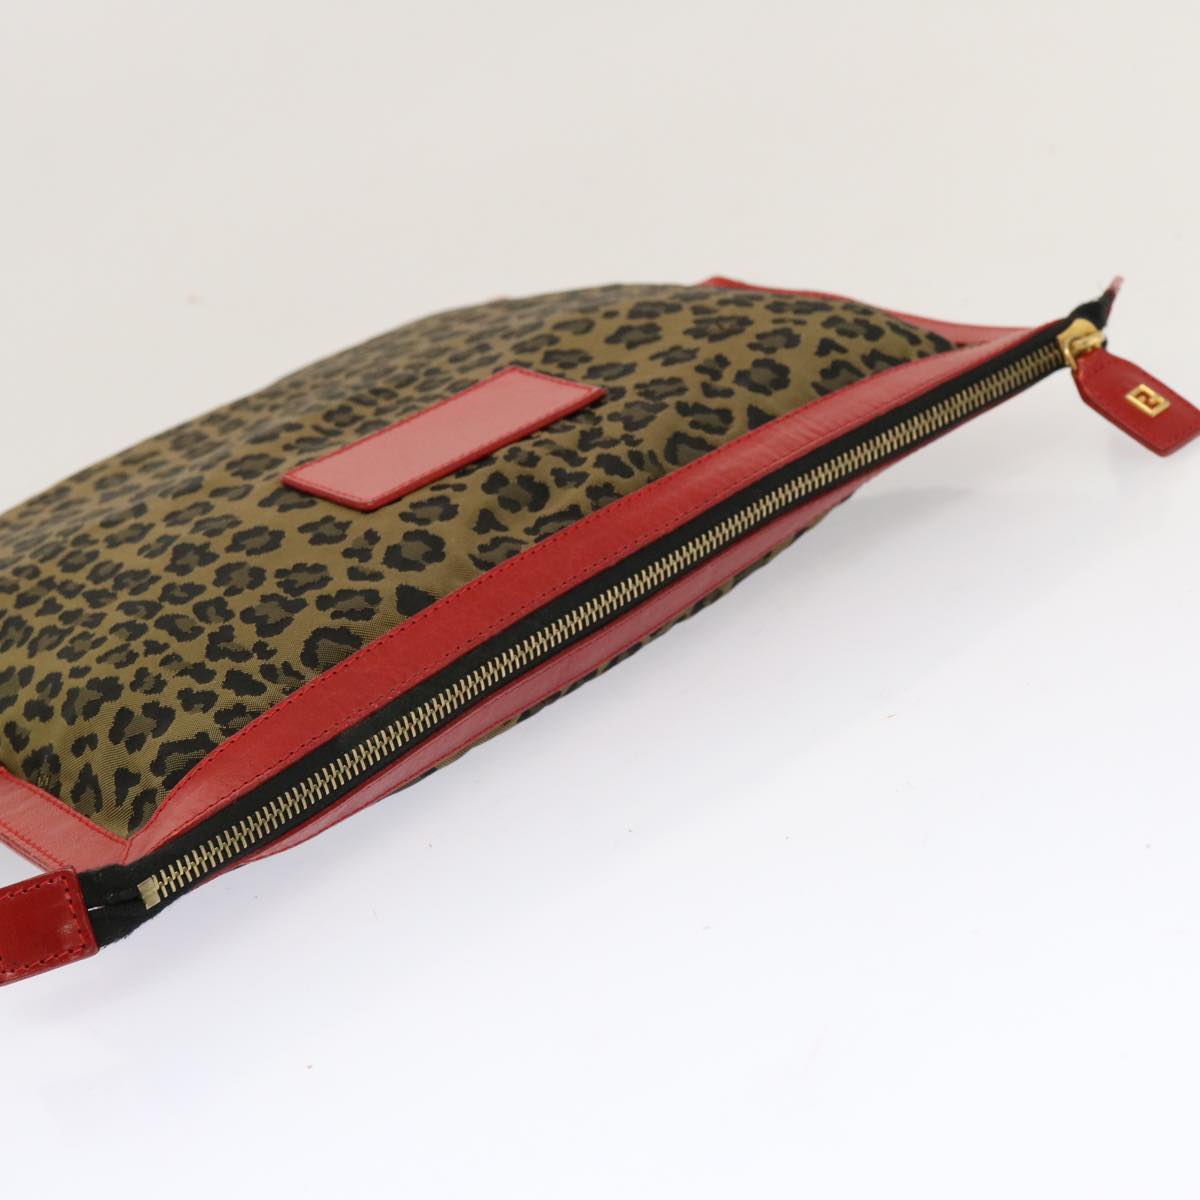 FENDI Leopard Clutch Bag Nylon Leather Red Brown Auth bs13085